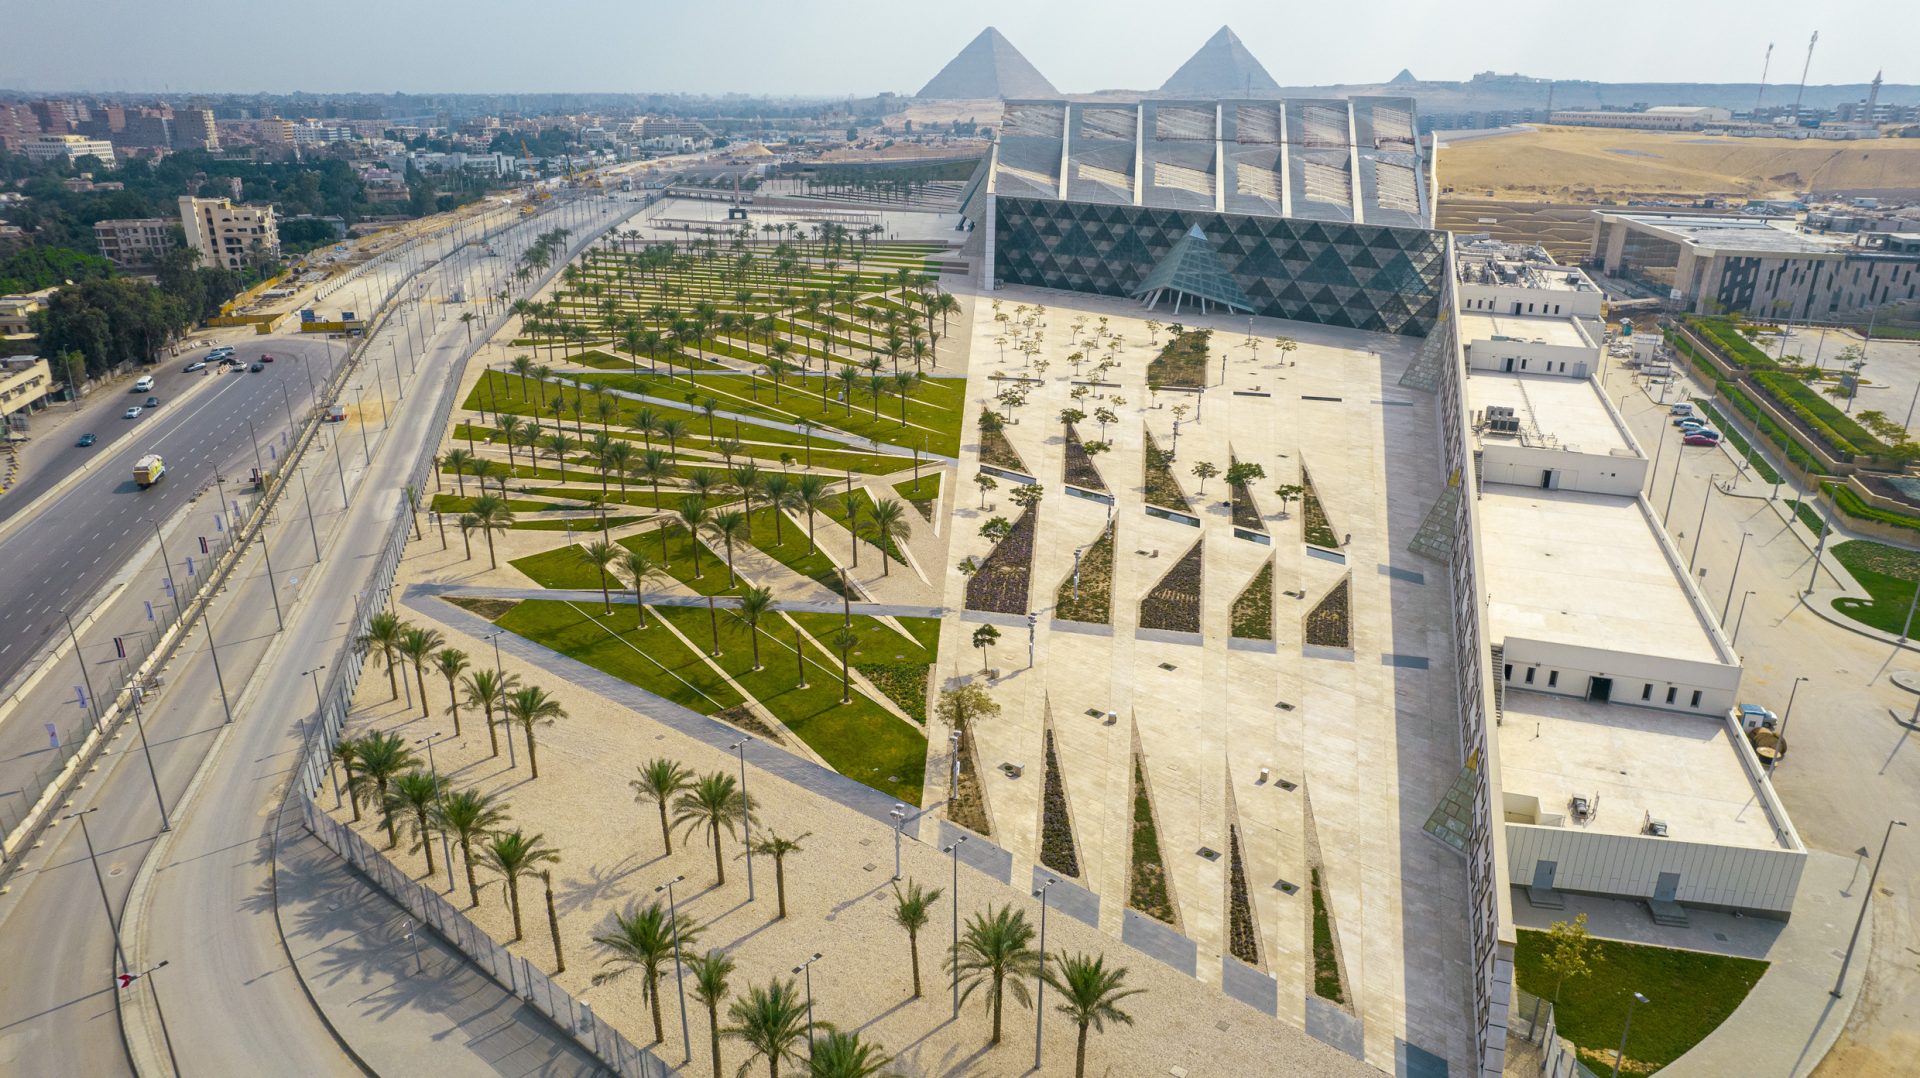 The Grand Egyptian Museum, Giza, by Heneghan Peng Architects